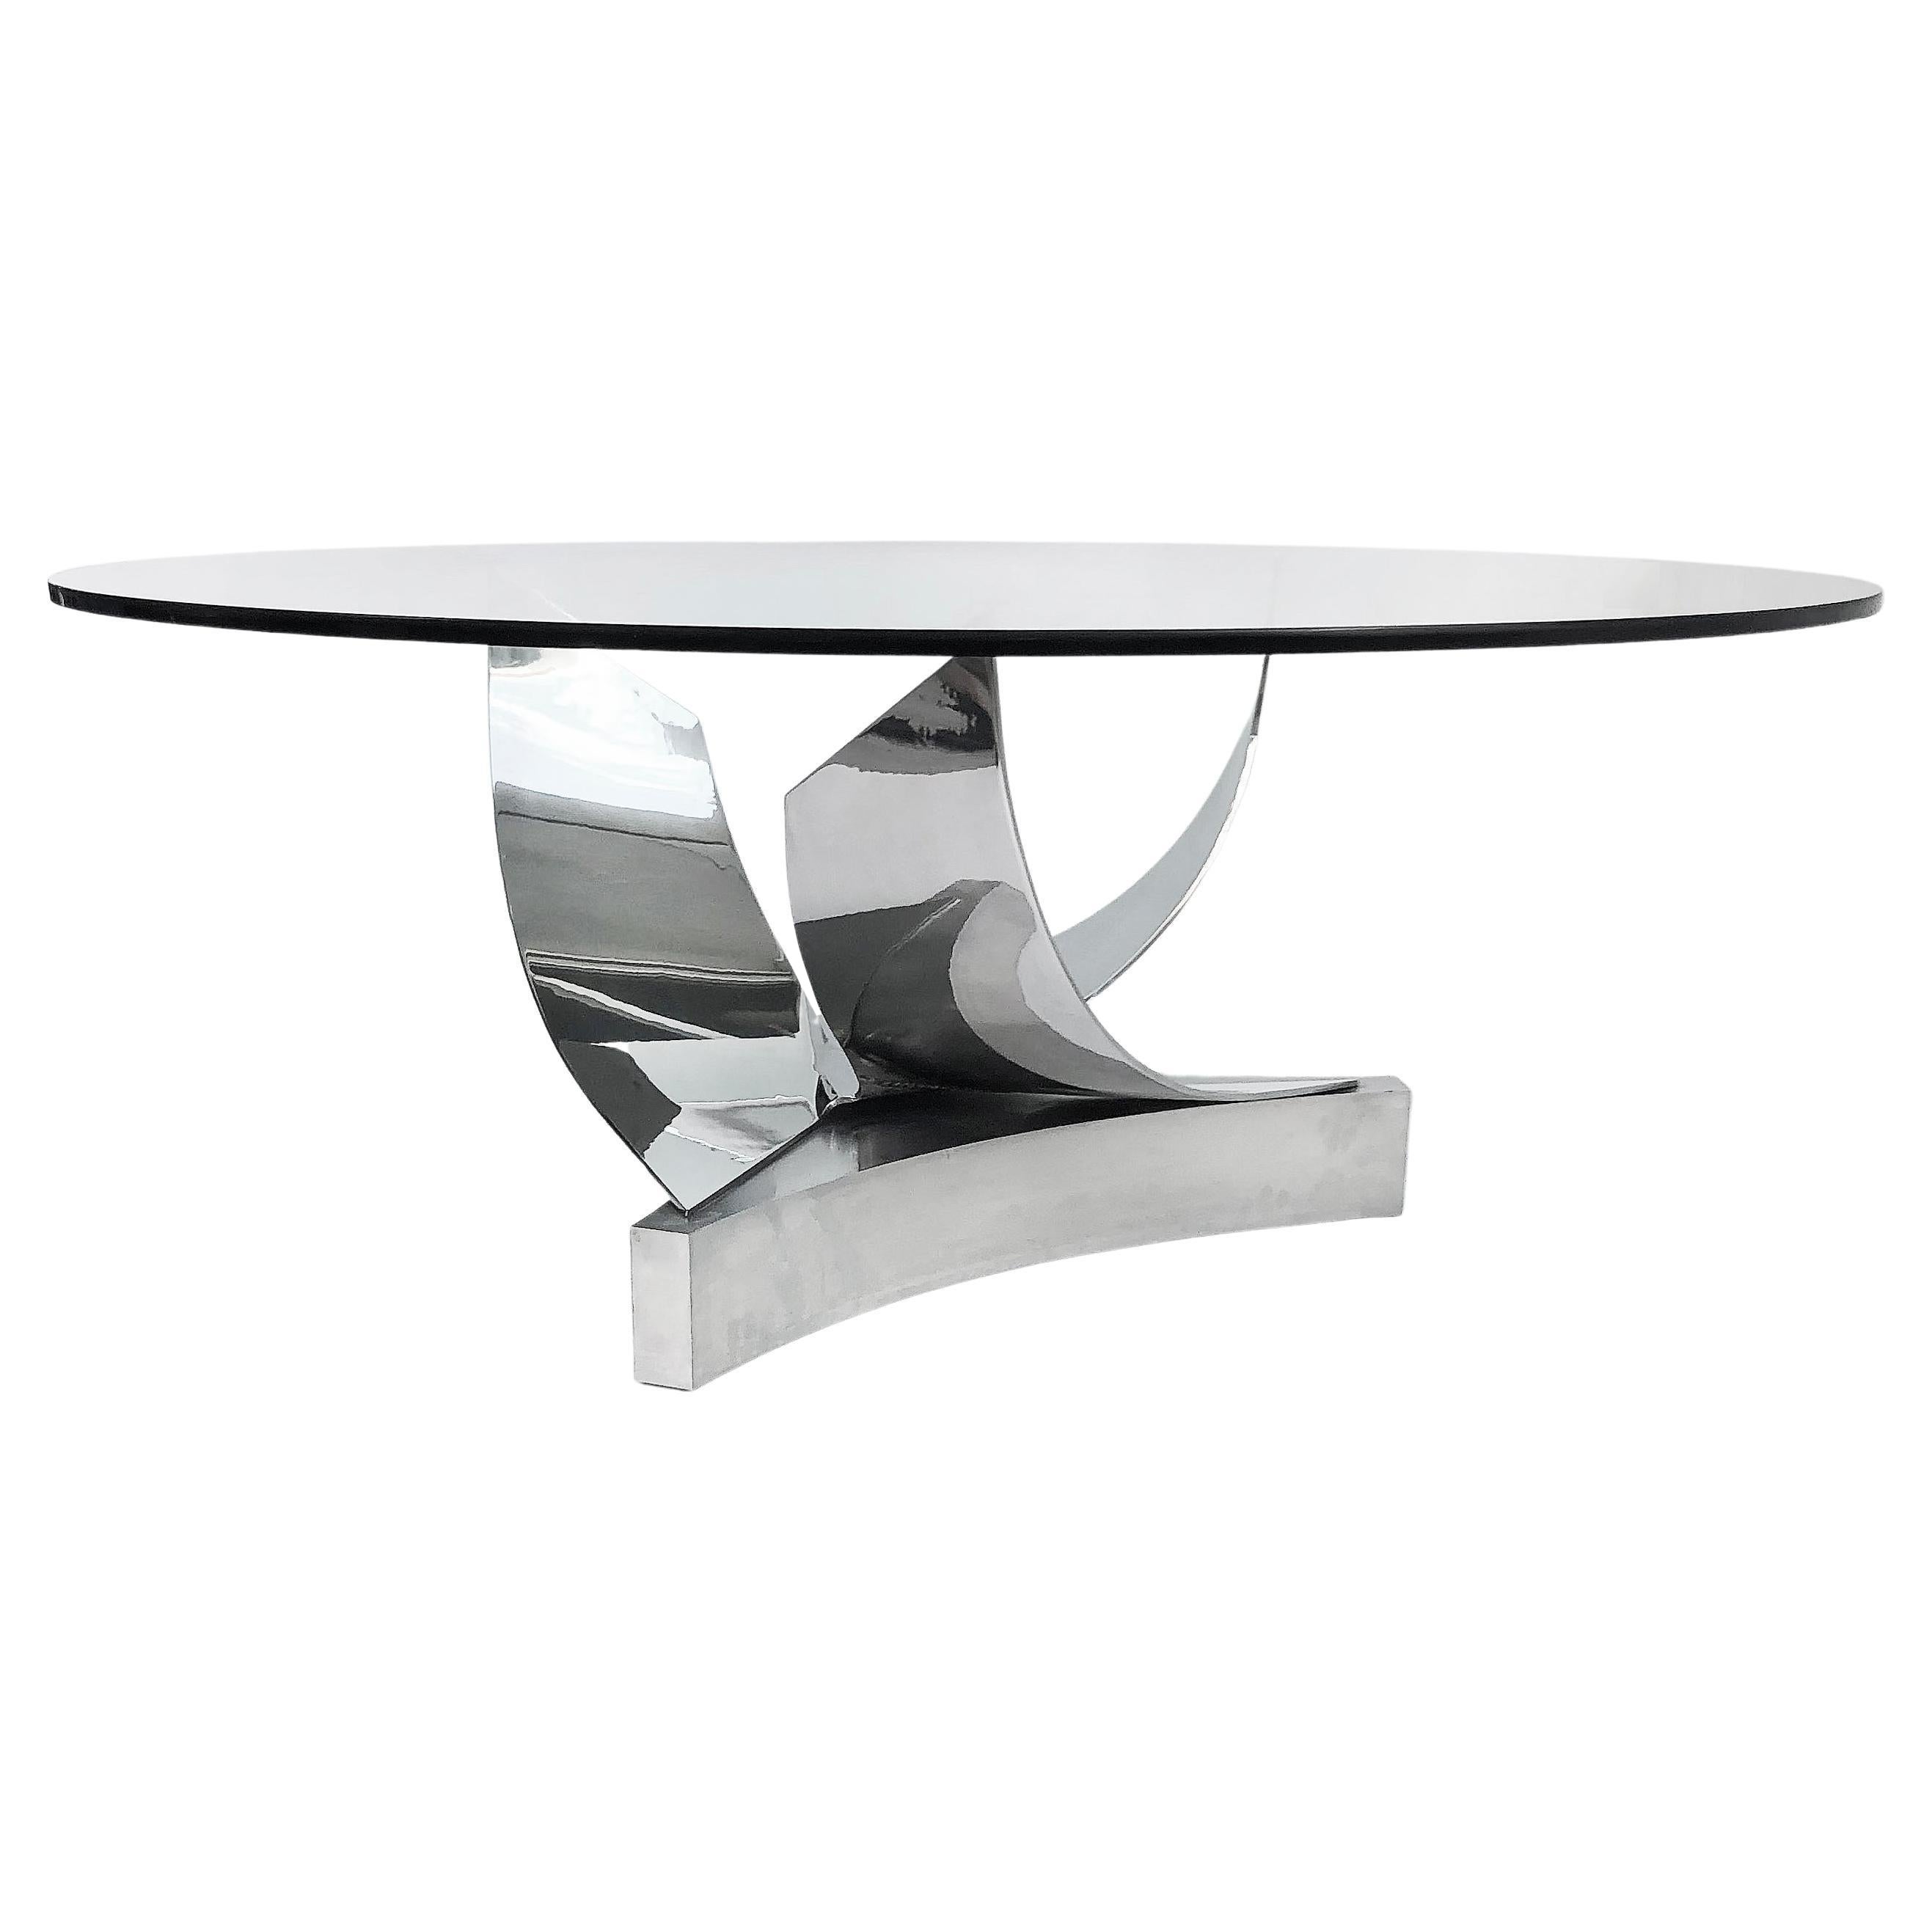 Ron Seff Important Stainless Steel "Coronet" Dining Table For Sale